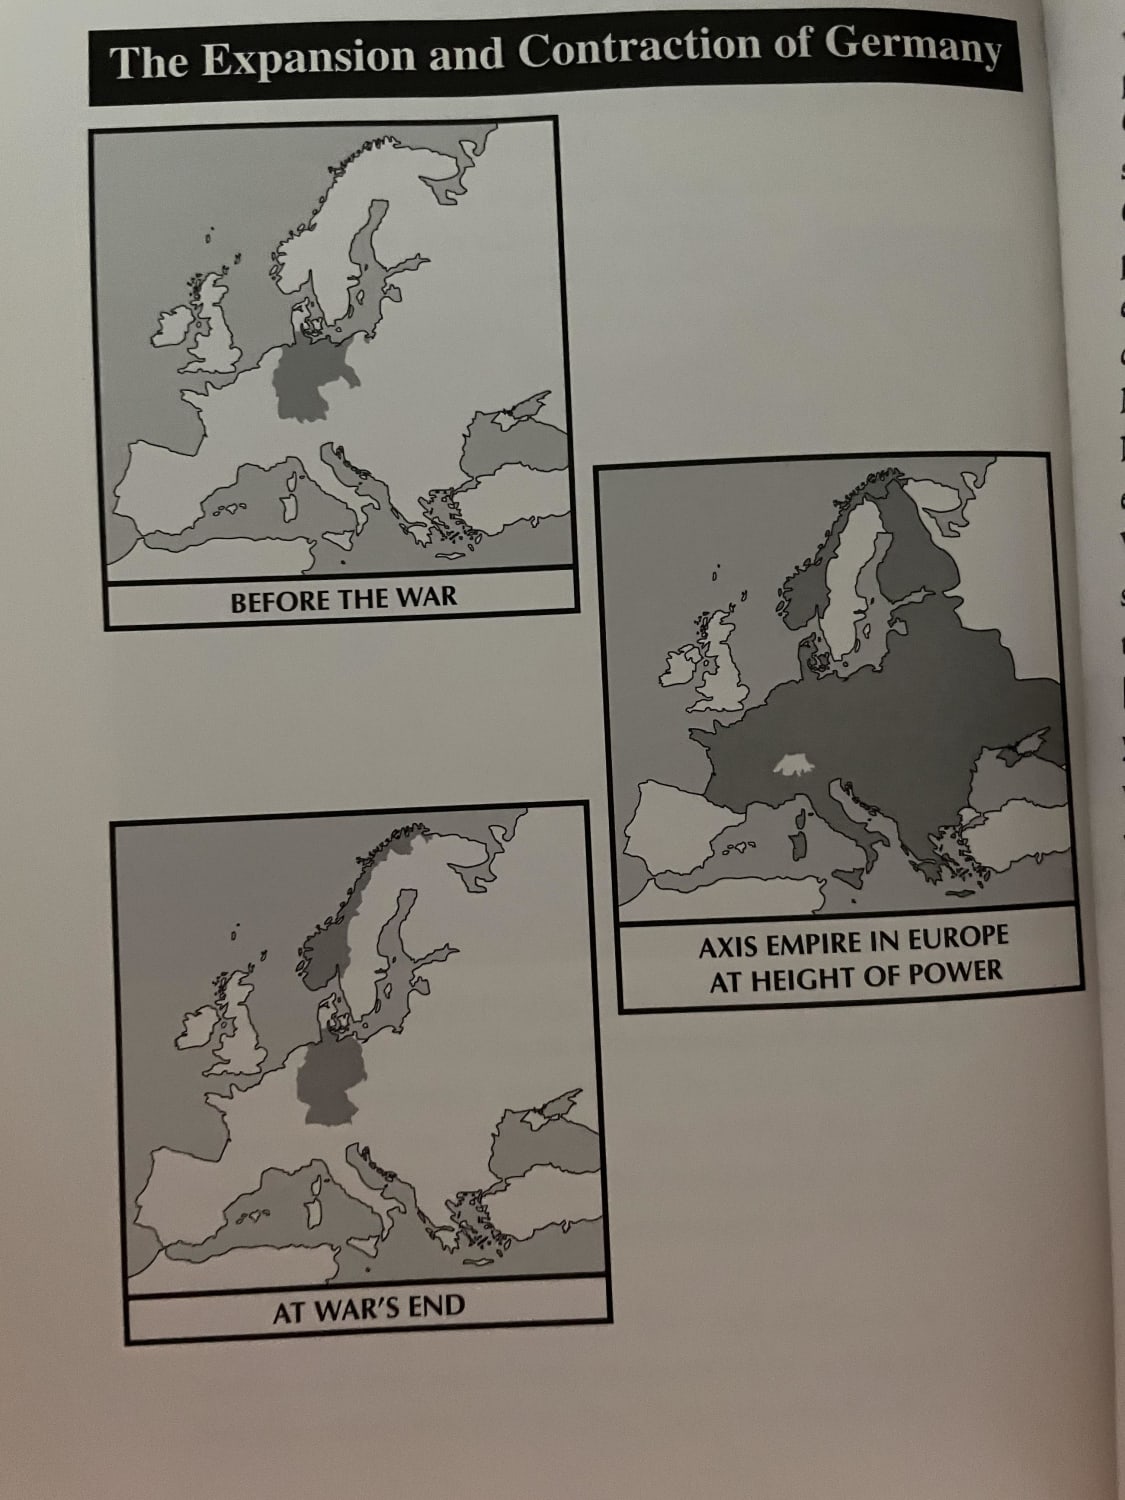 Very “accurate” maps in this book I’m reading